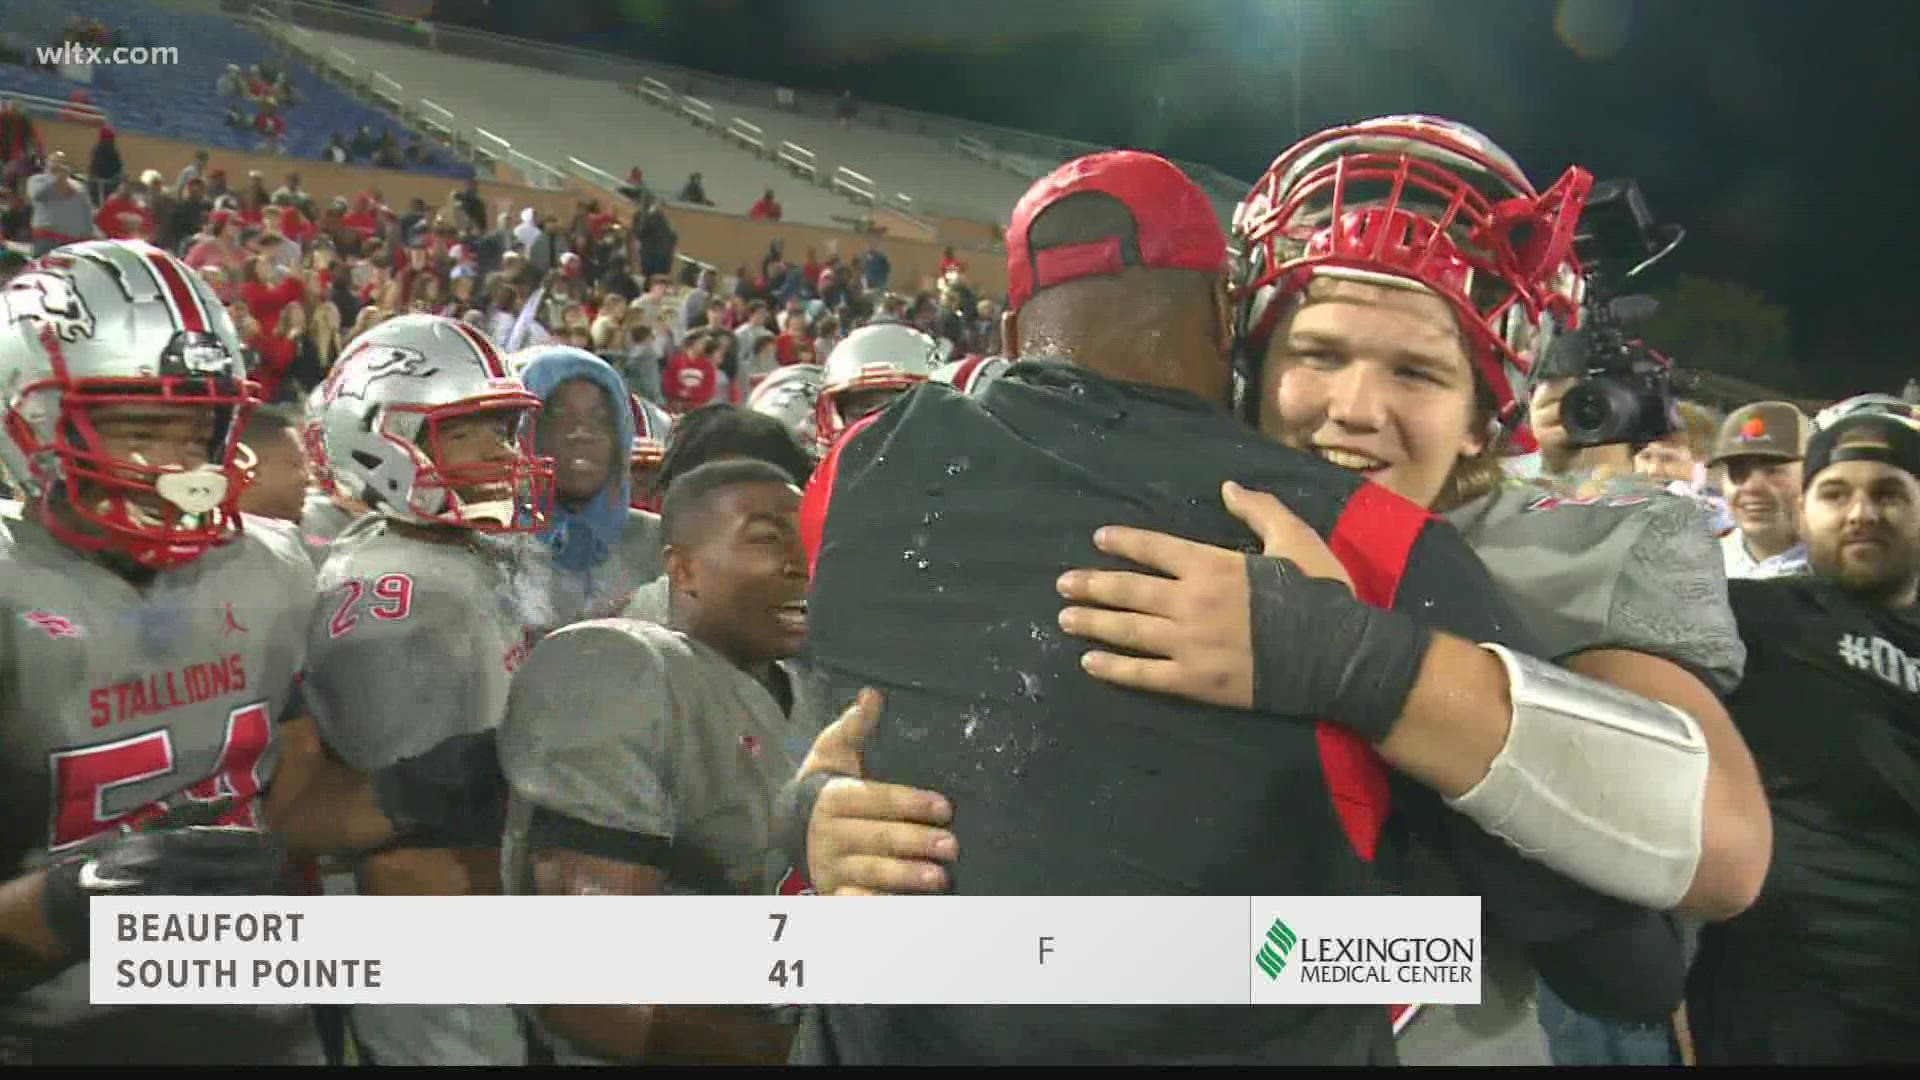 South Pointe wins the Class 4A state championship with an impressive 41-7 victory over Beaufort.